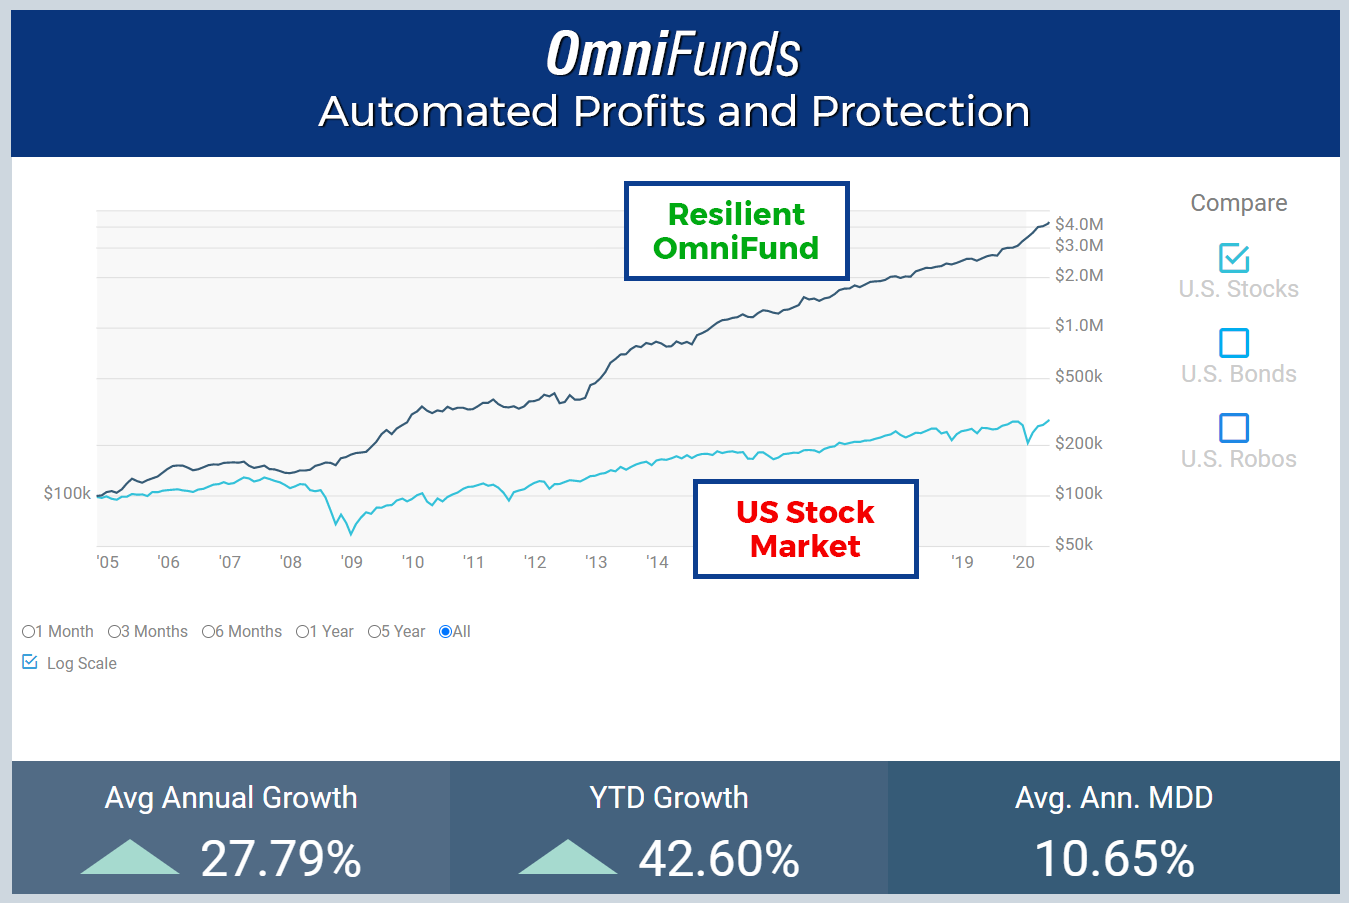 OmniFunds is beating the market during Covid in 2020 by a wide margin. Get your automated profits and downside risk protection for your retirement account now